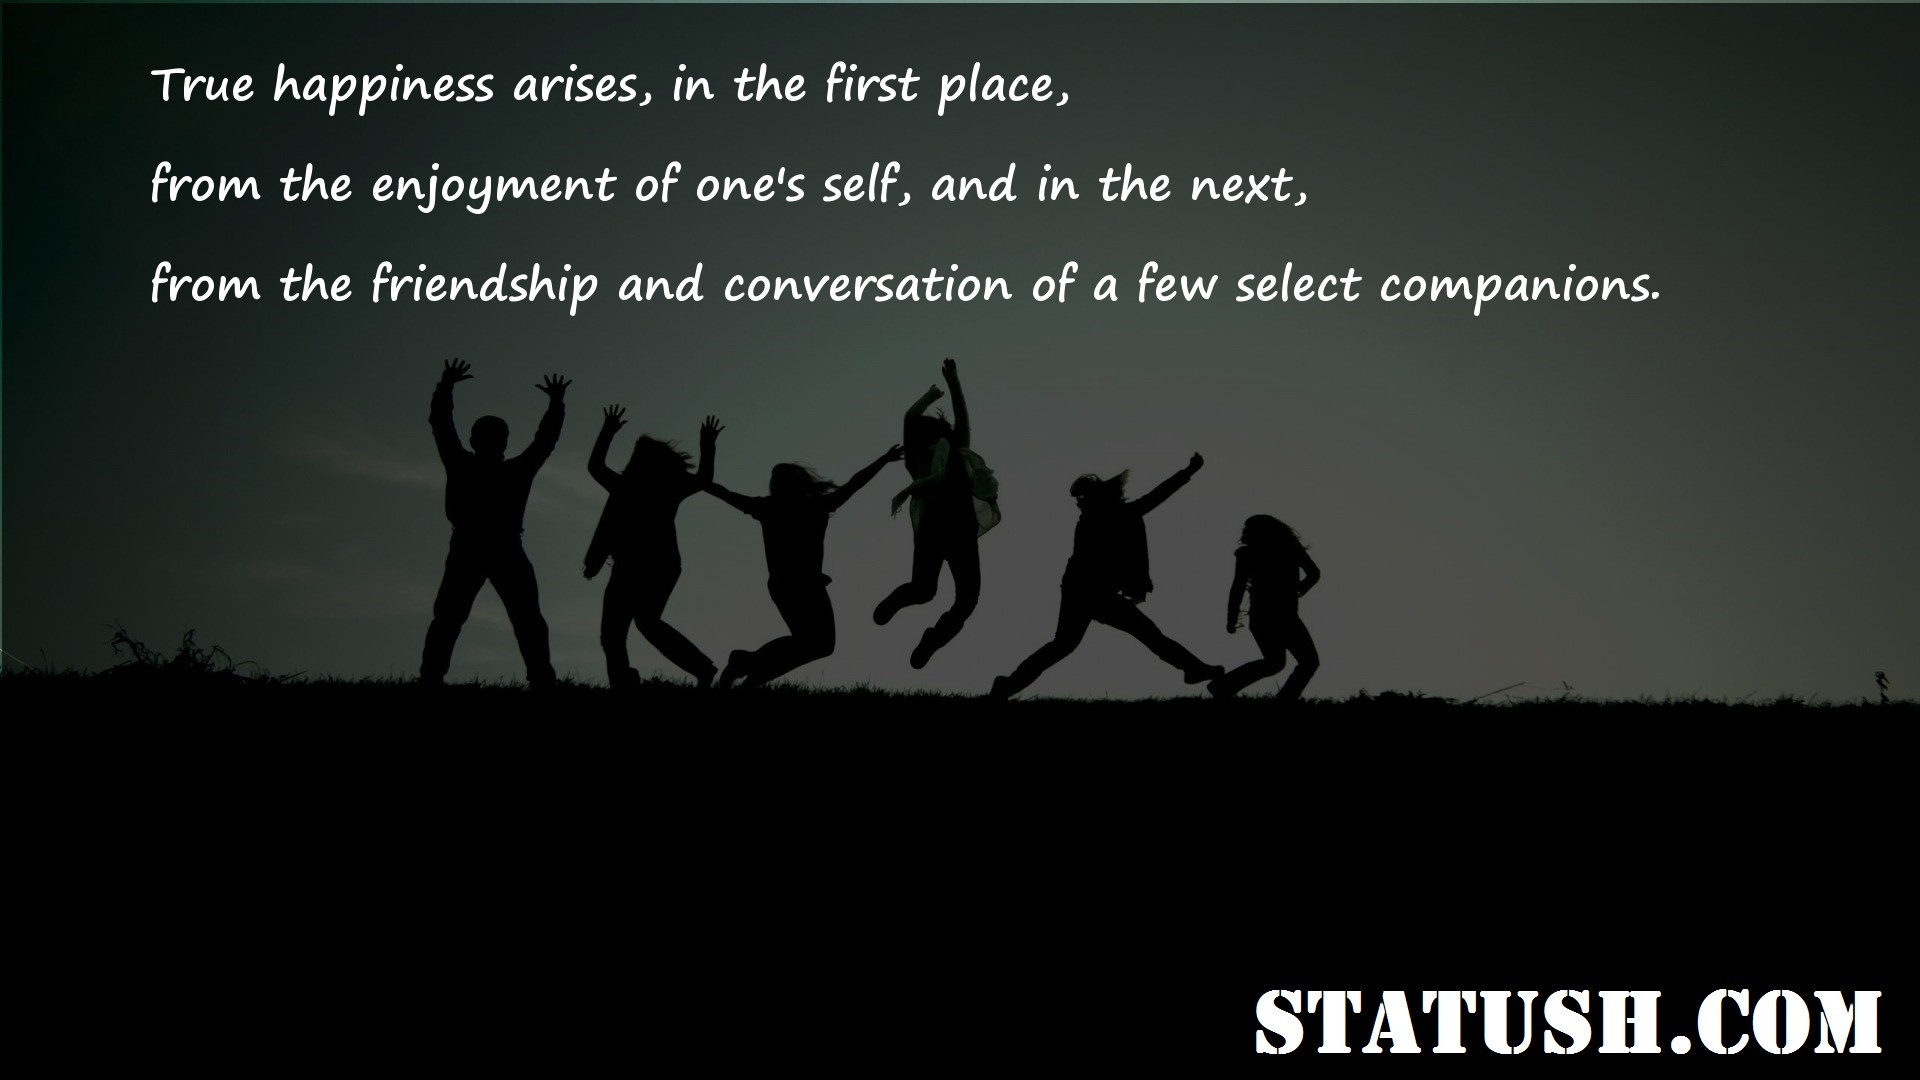 True happiness arises in the first place Friendship Quotes at statush.com